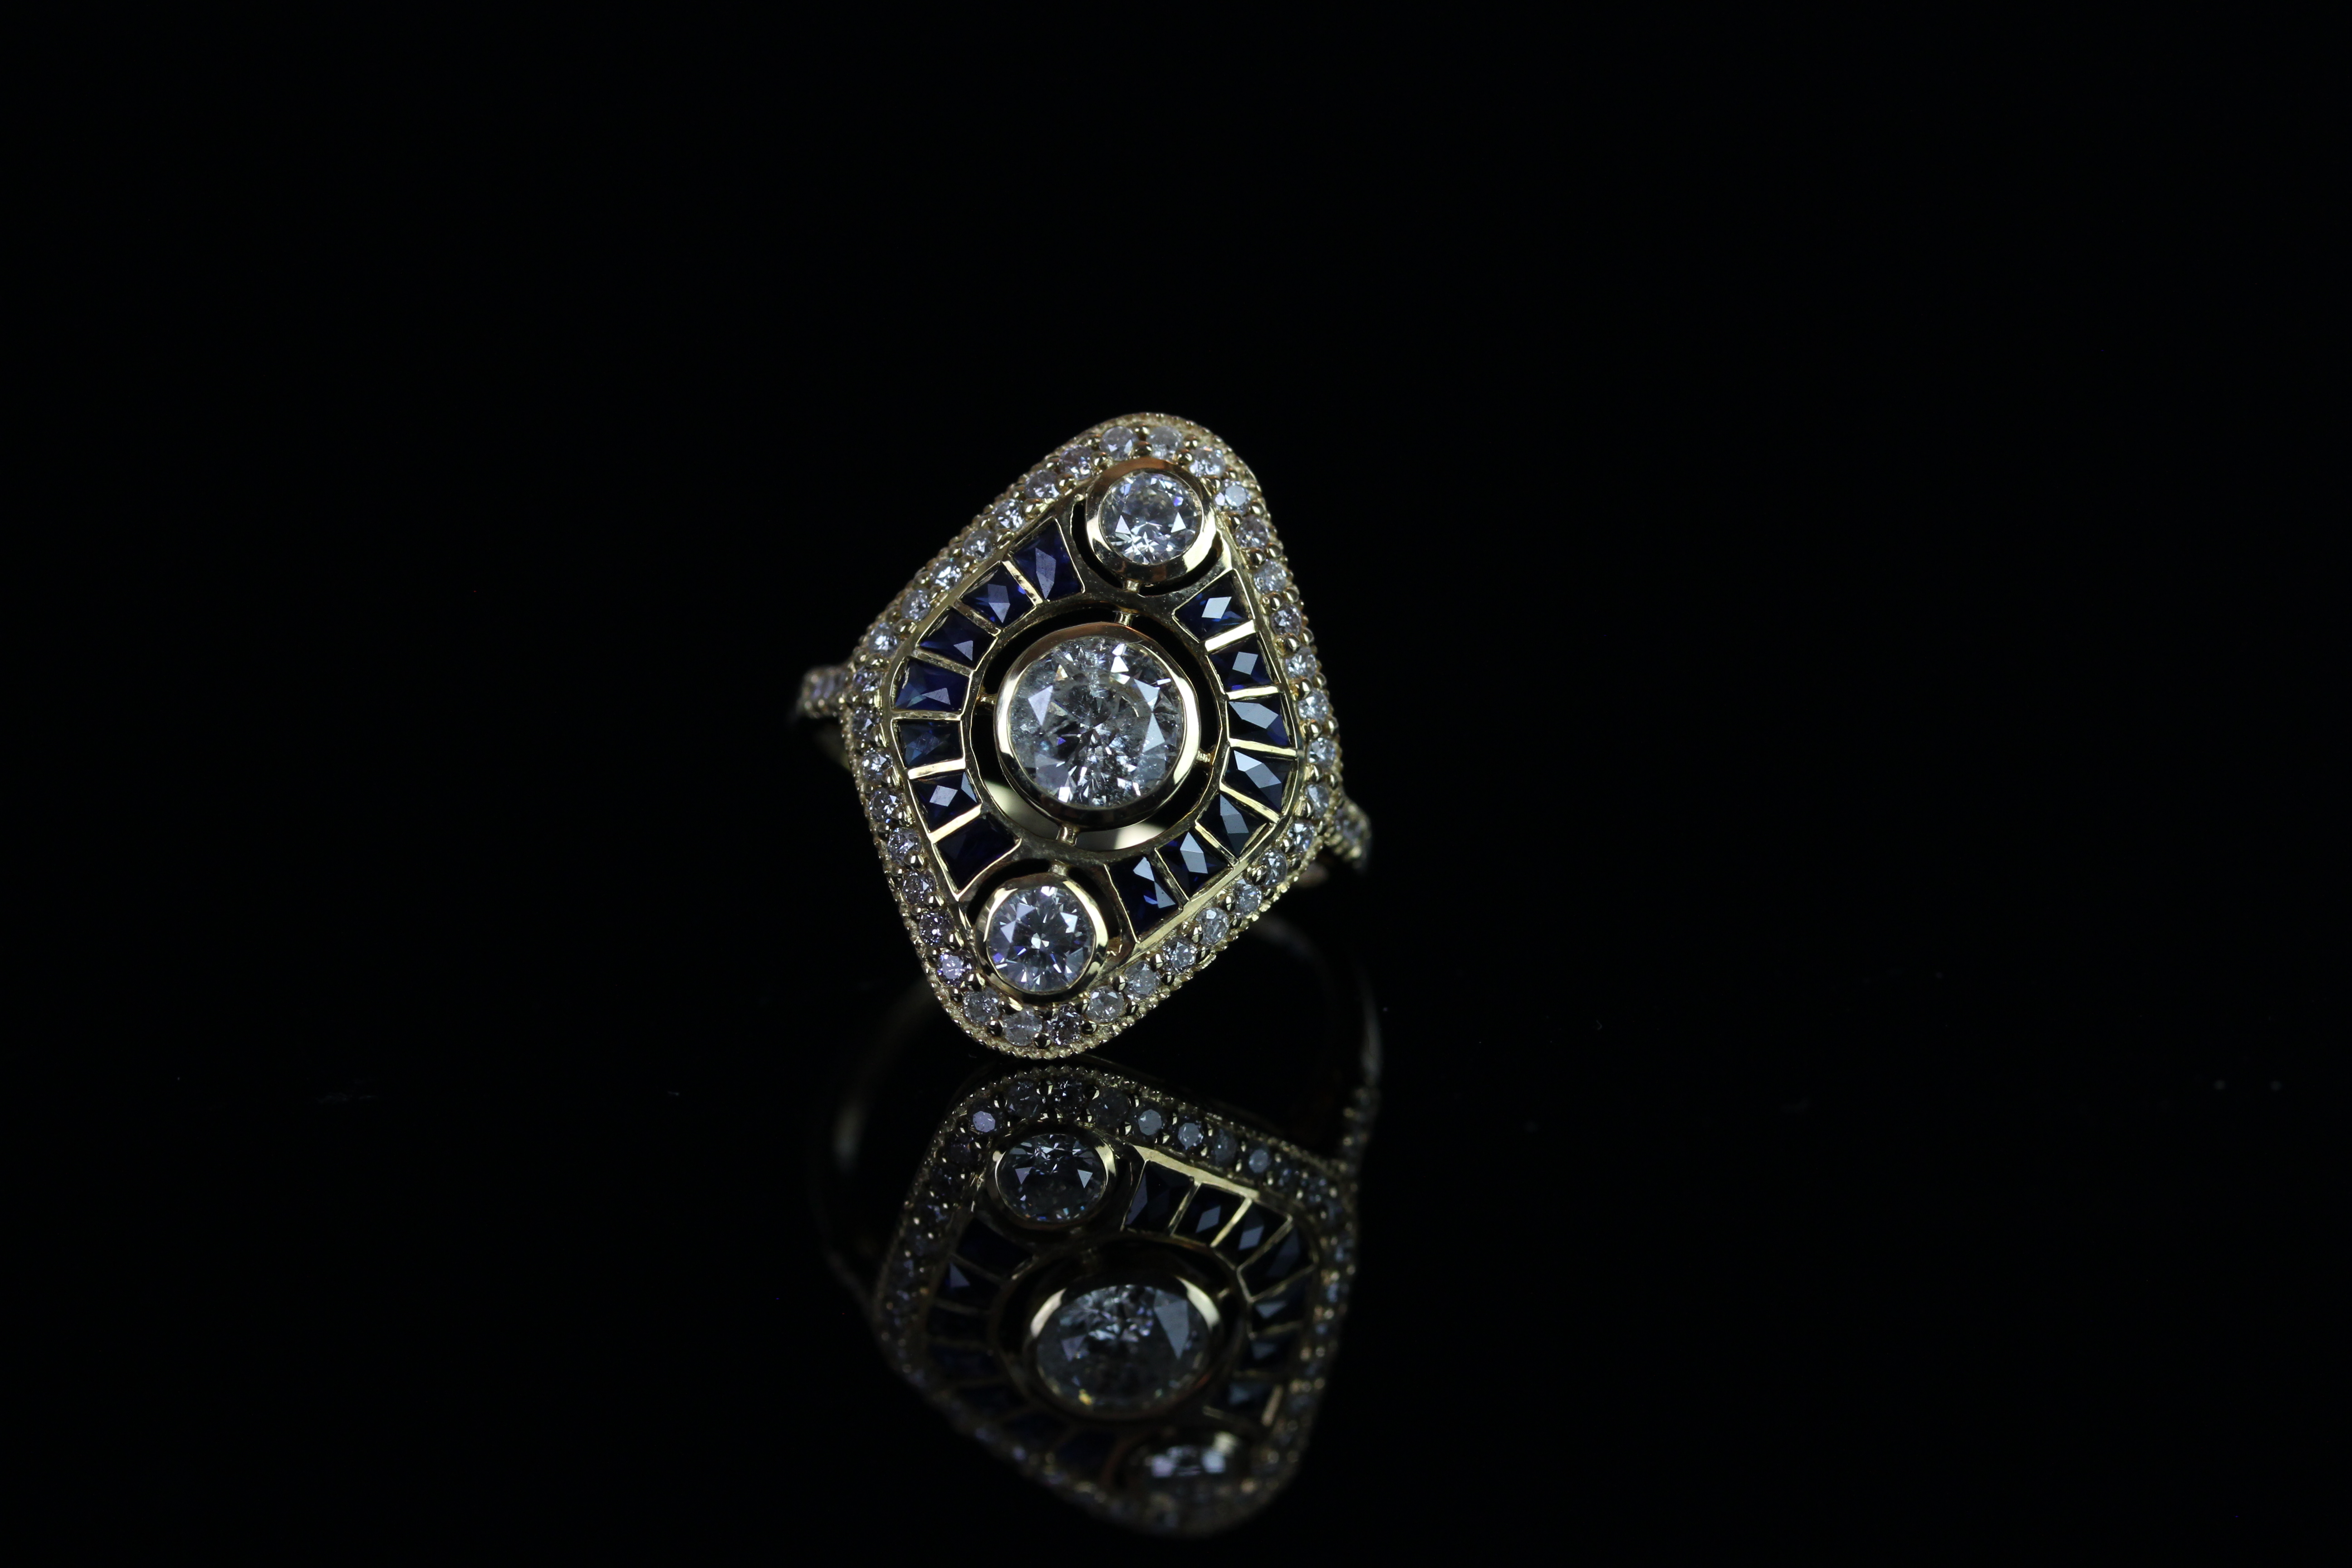 14ct Yellow Gold Diamond and Sapphire art deco style ring featuring centre, round brilliant cut